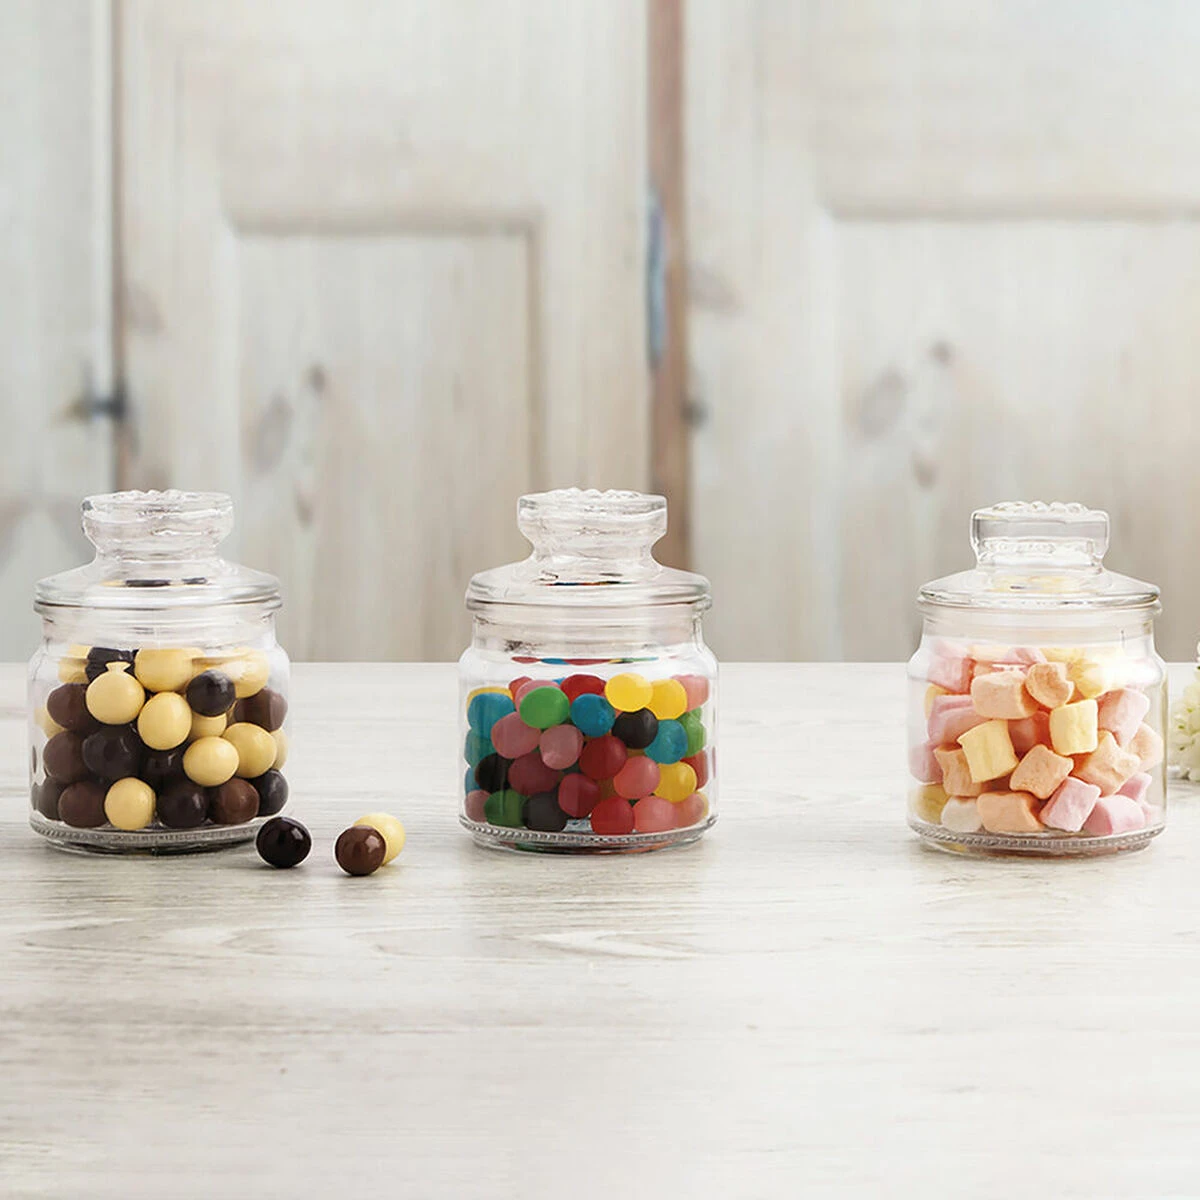 Three jars of colorful candy